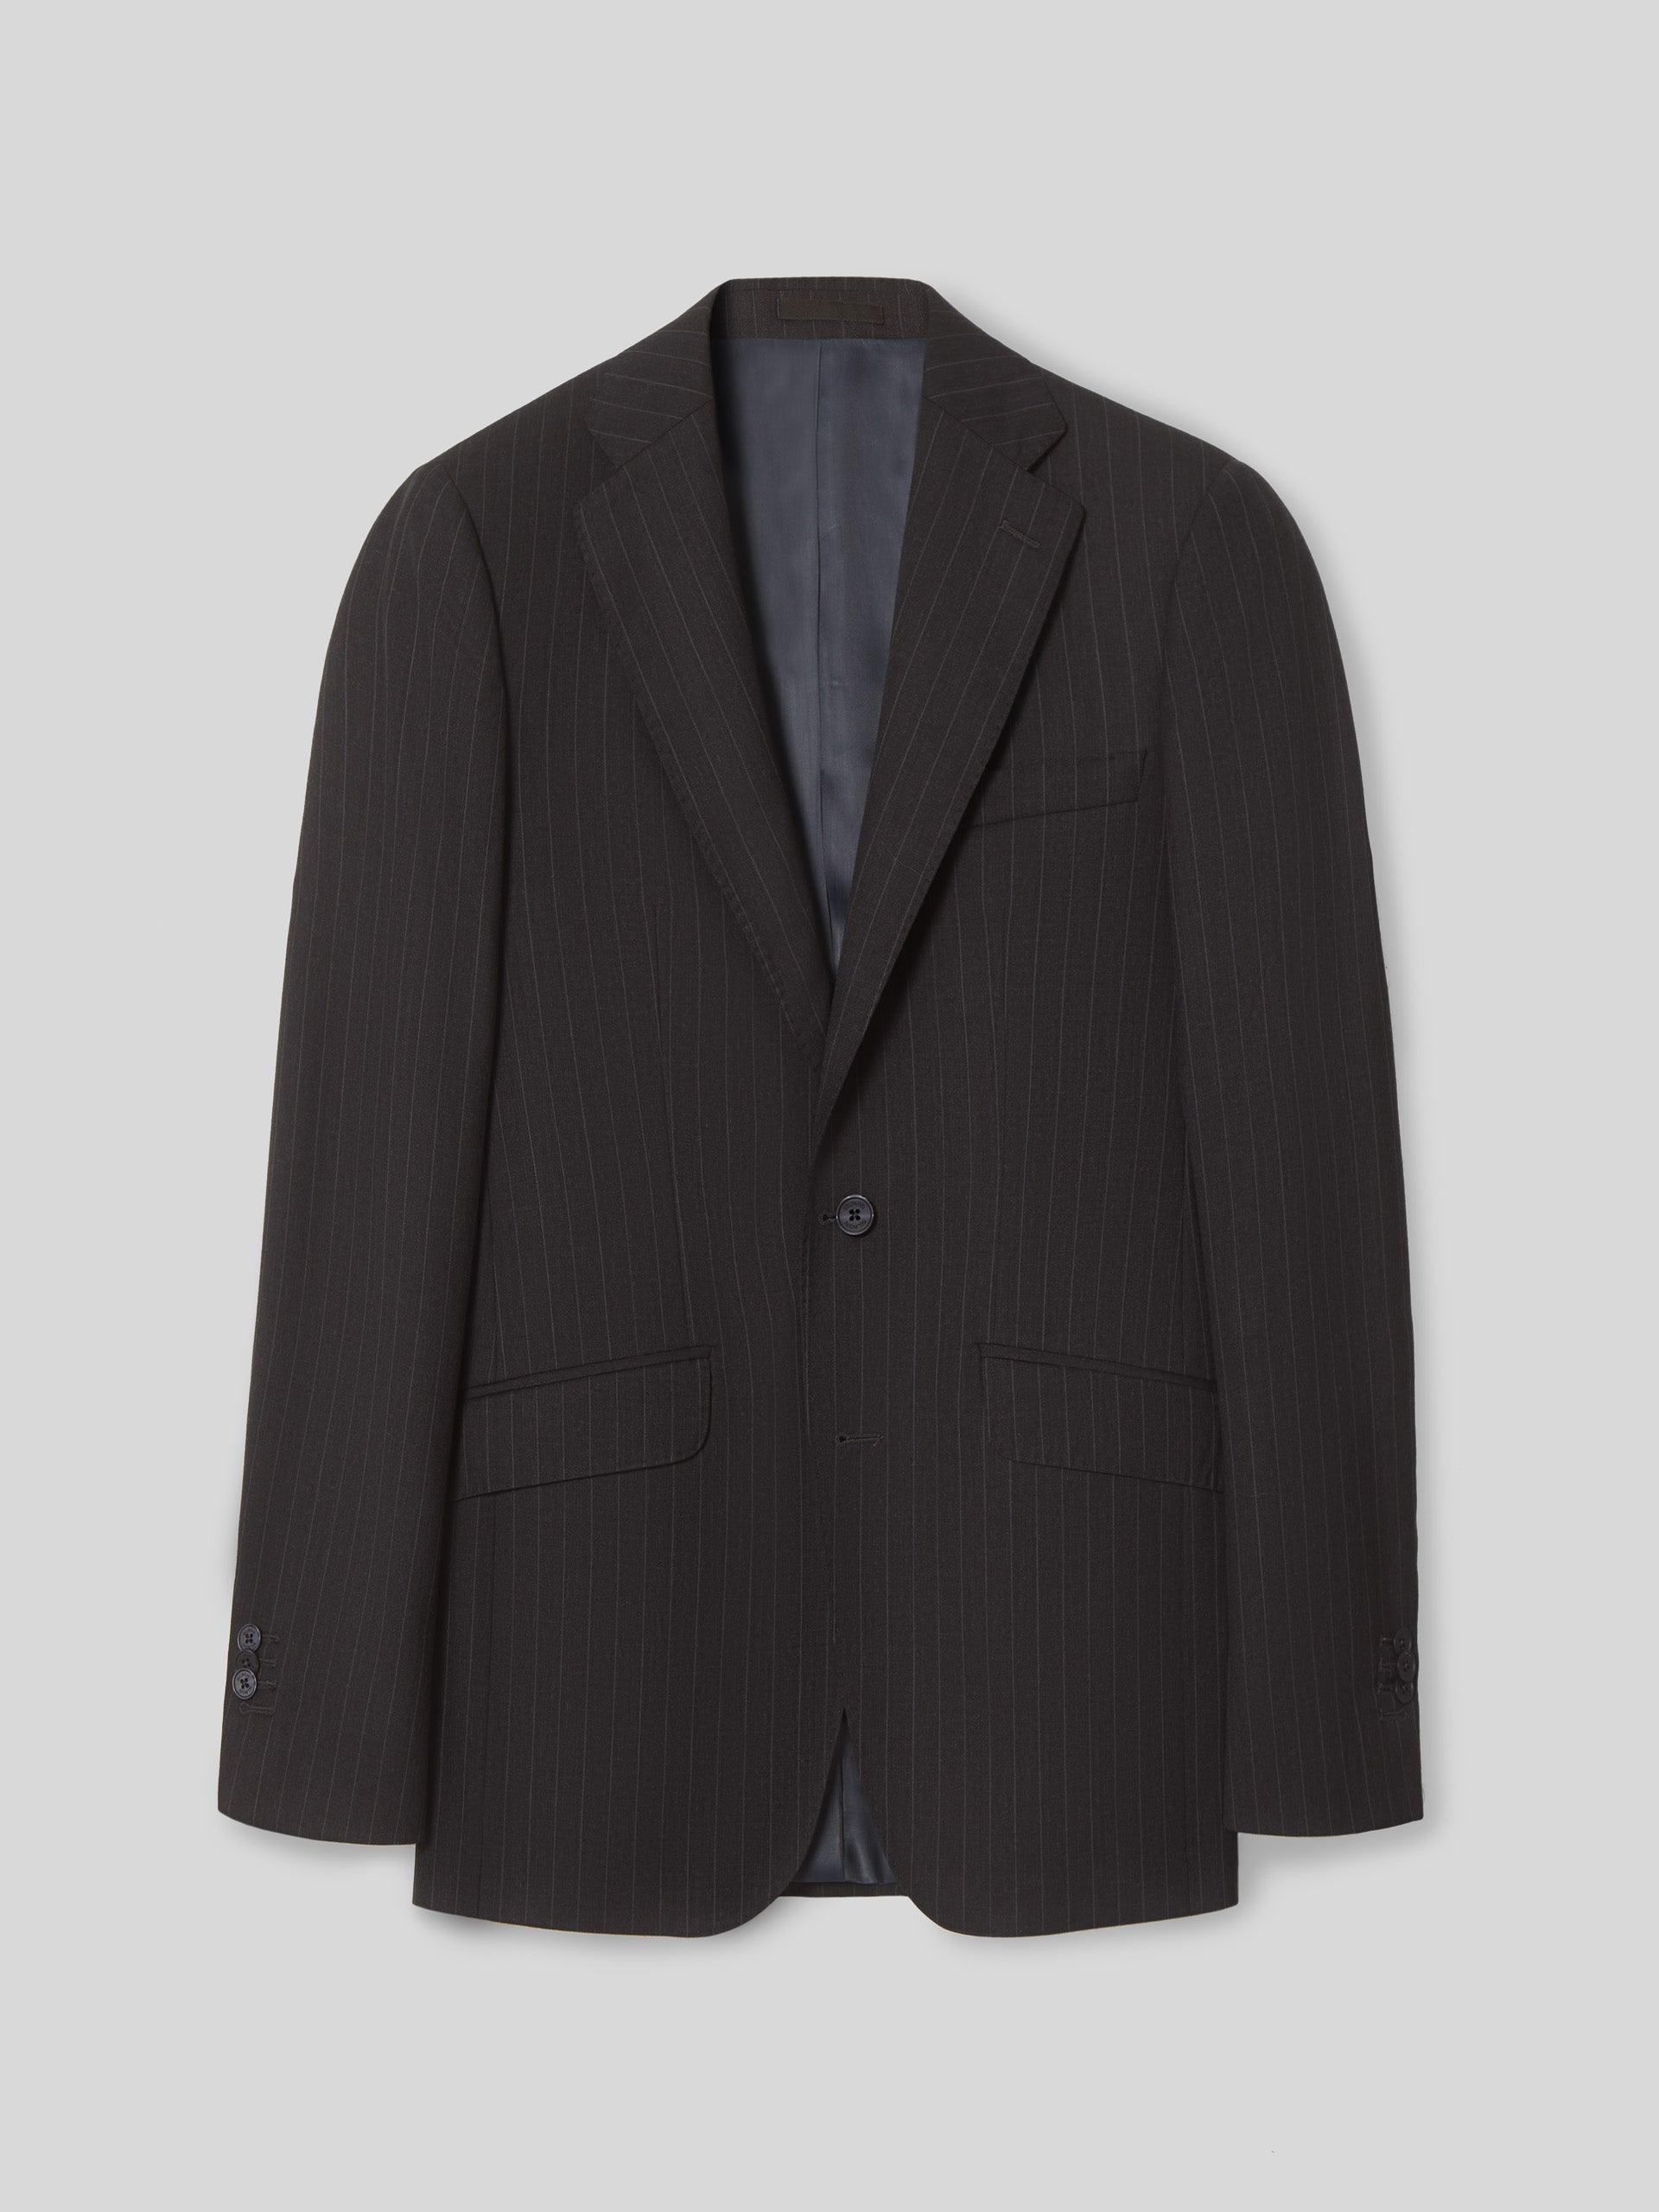 Classic gray diplomatic suit jacket